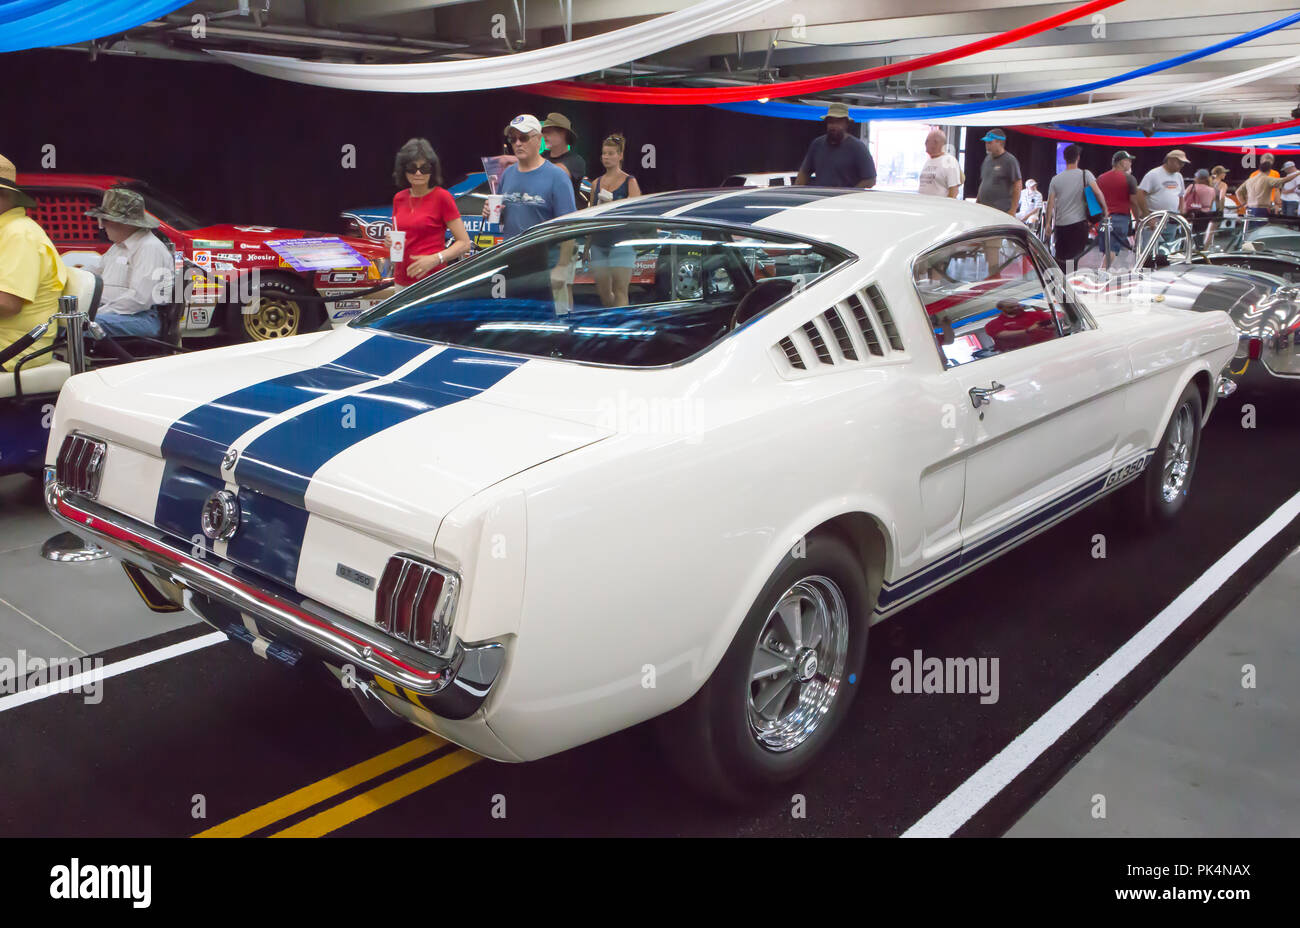 CONCORD, NC (USA) - April 8, 2017:  A 1965 Ford Mustang Shelby GT-350 on display at the Pennzoil AutoFair classic car show at Charlotte Motor Speedway. Stock Photo